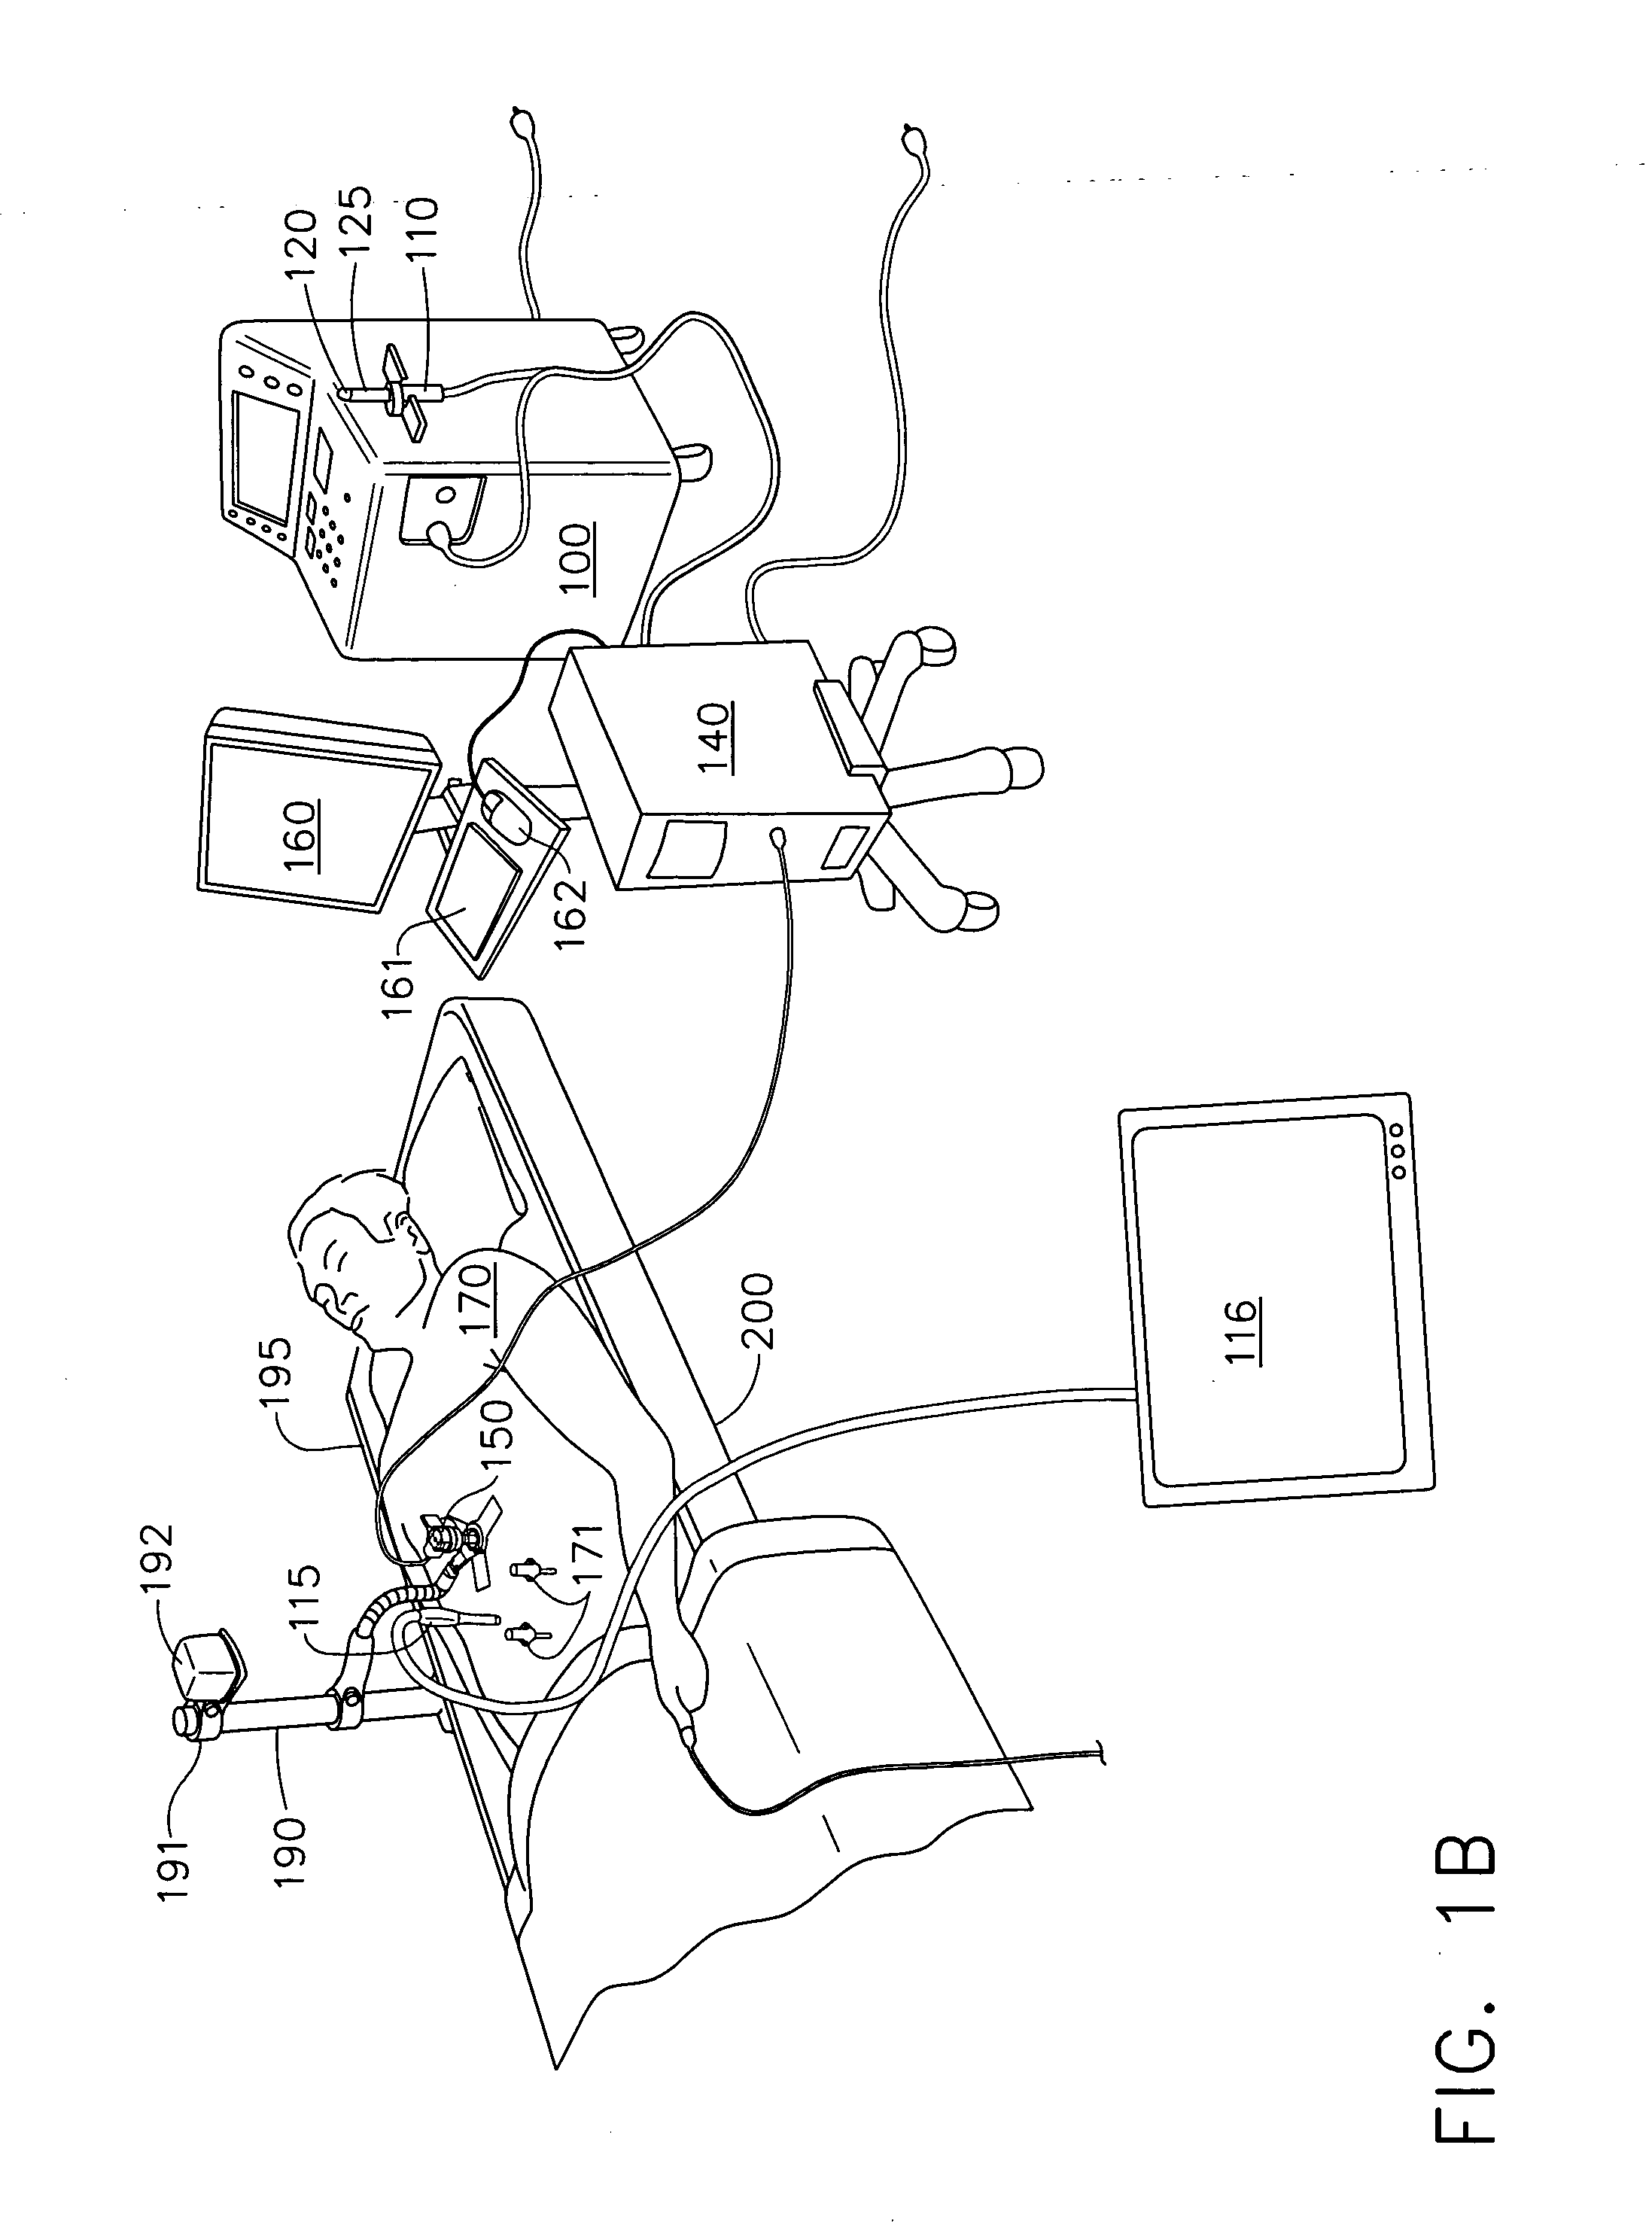 Surgical device guide for use with an imaging system